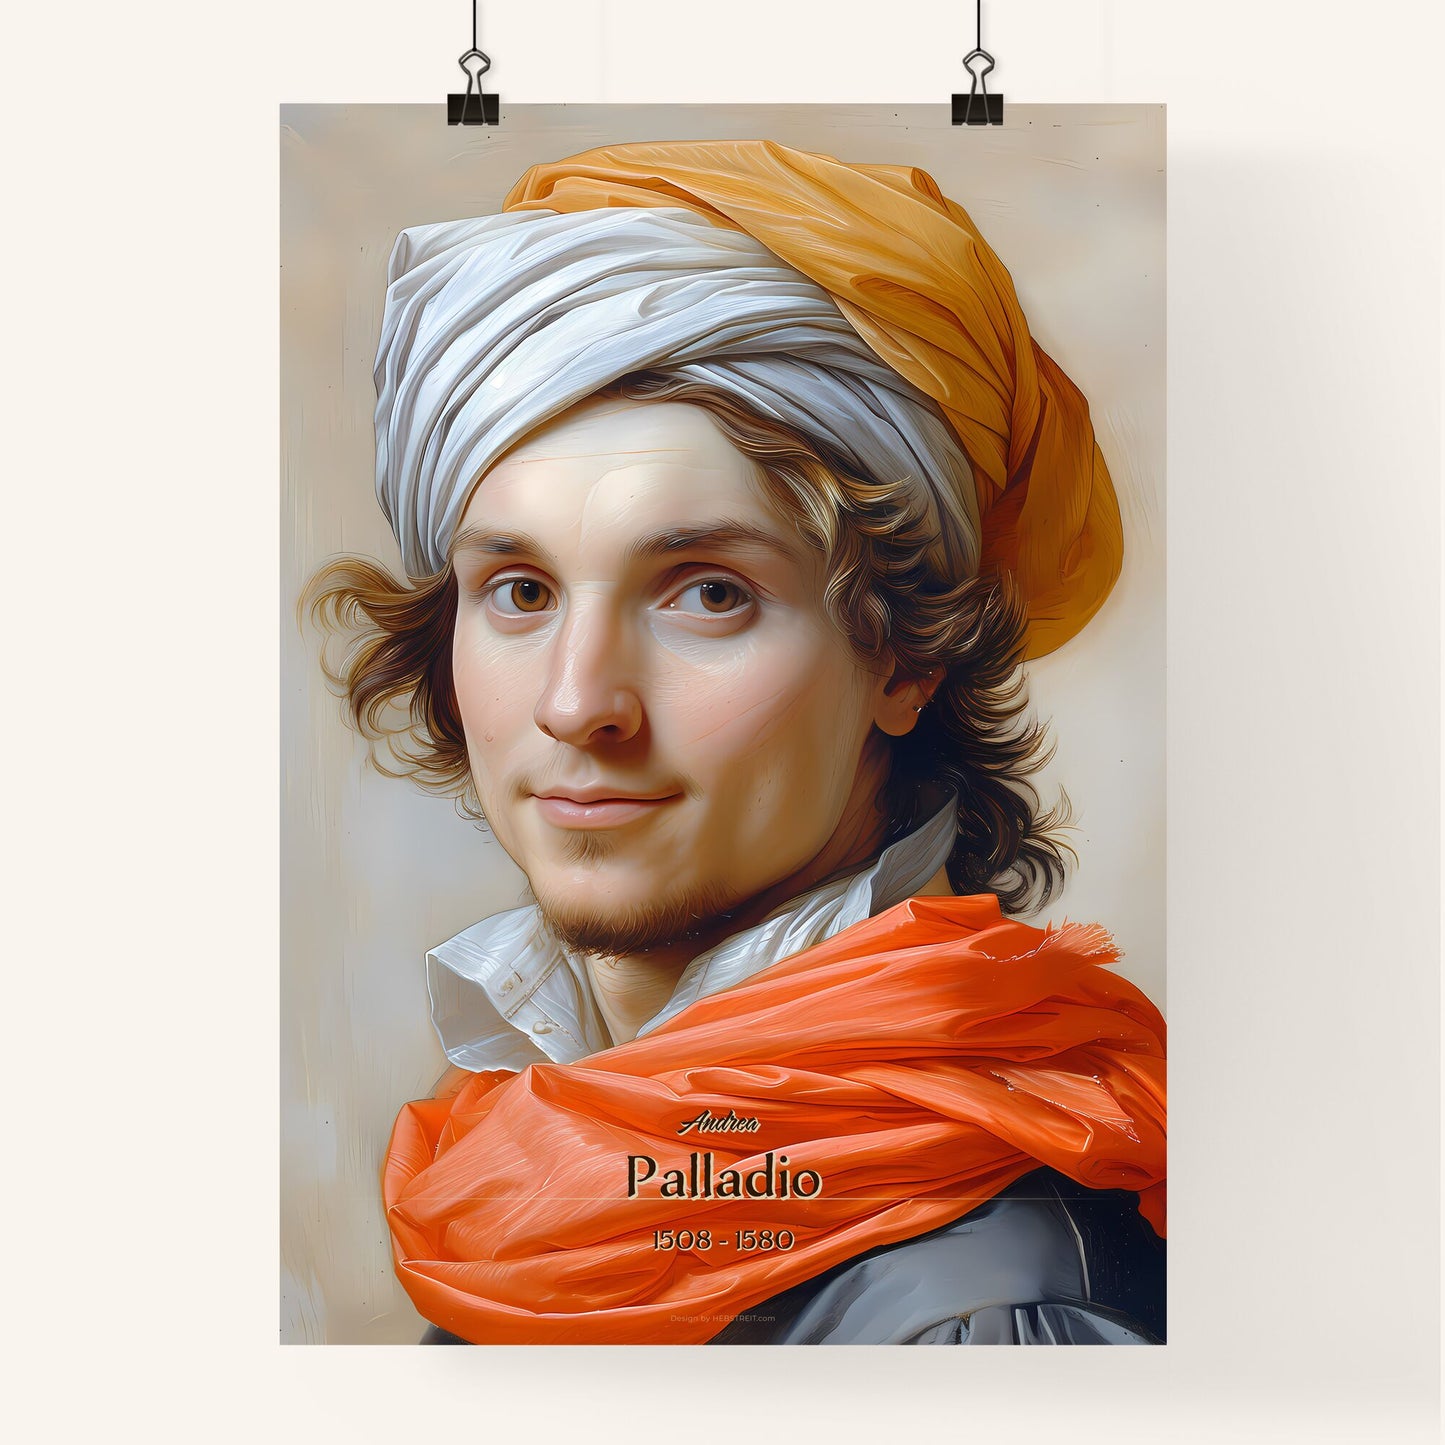 Andrea, Palladio, 1508 - 1580, A Poster of a man with a turban and a scarf Default Title